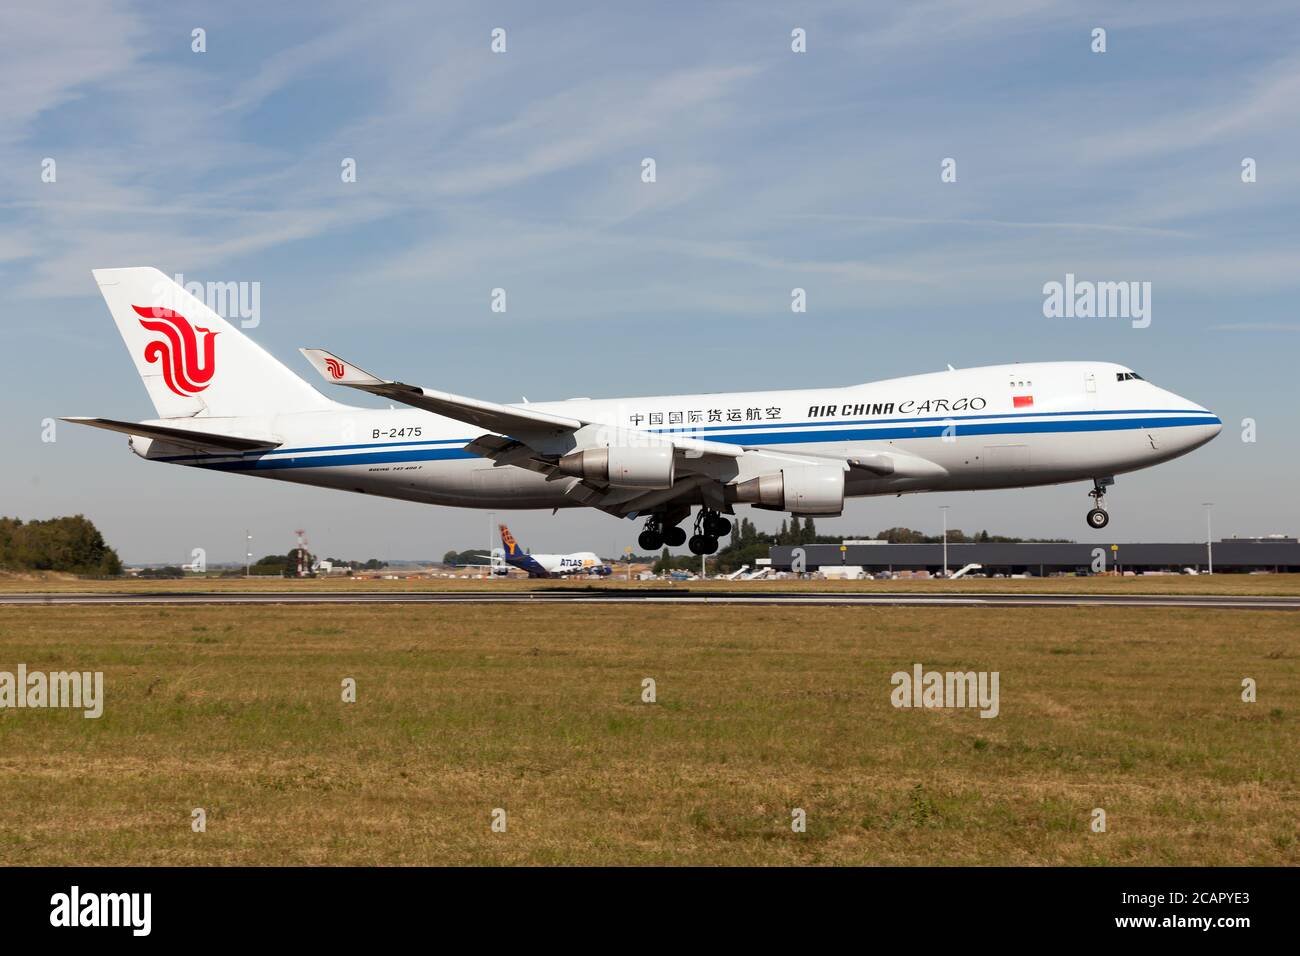 An Air China Cargo Boeing 747-400 freighter landing at Liege Bierset Airport. Stock Photo